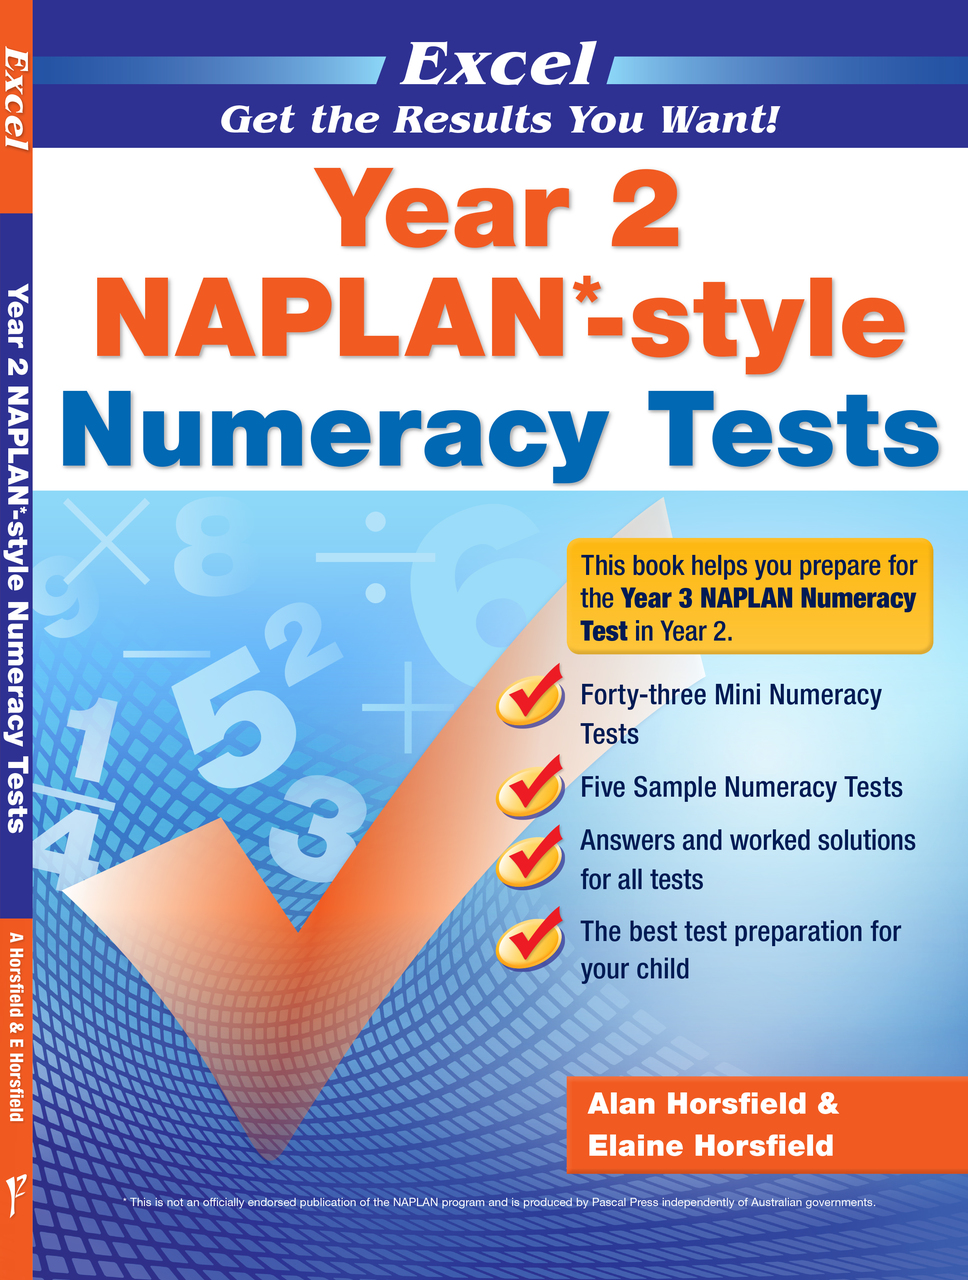 EXCEL - YEAR 2 NAPLAN*-STYLE NUMERACY TESTS